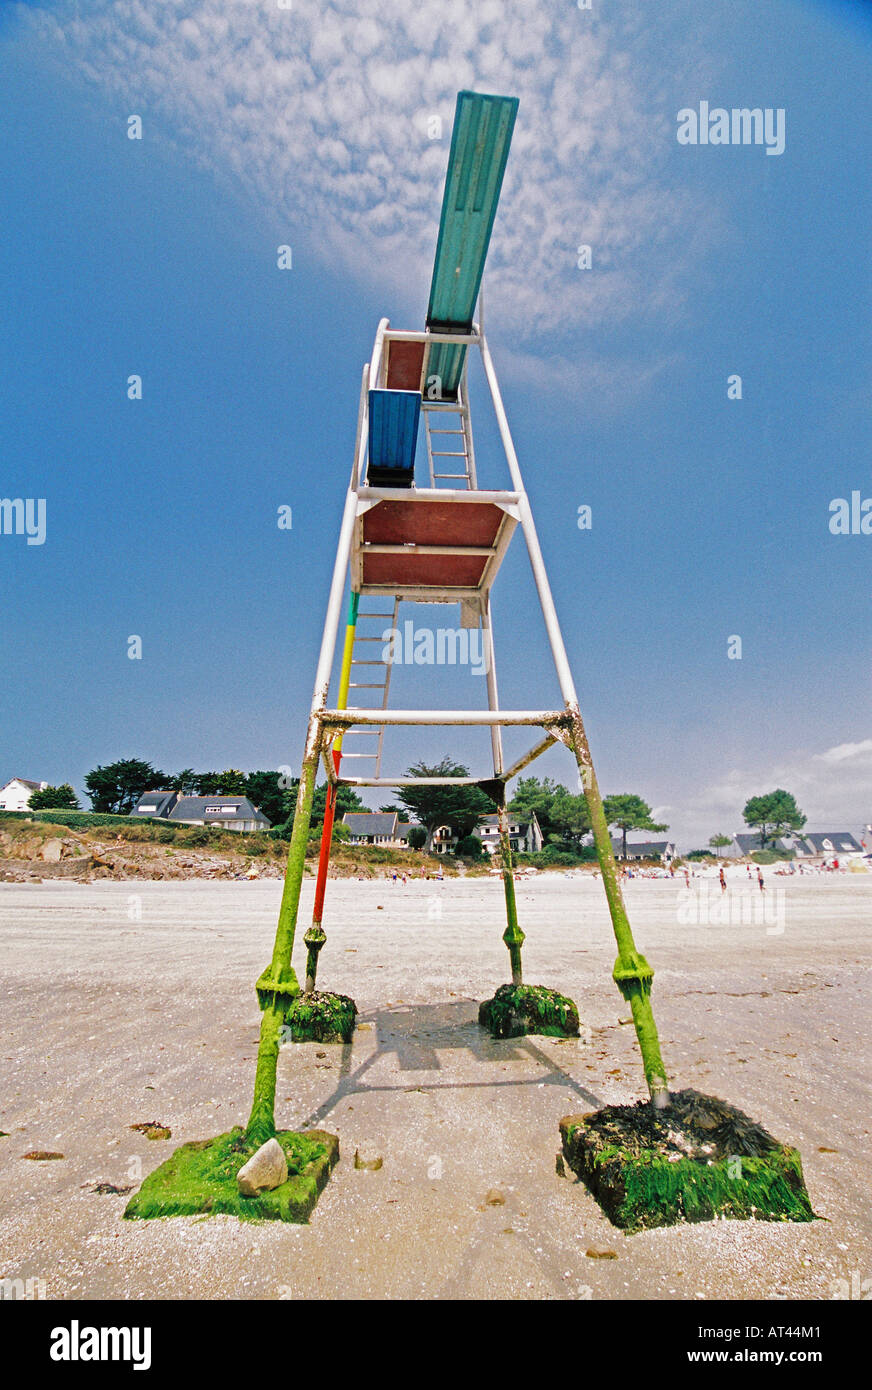 Diving board on the beach on Carnac Plage - France - Brittany Stock Photo